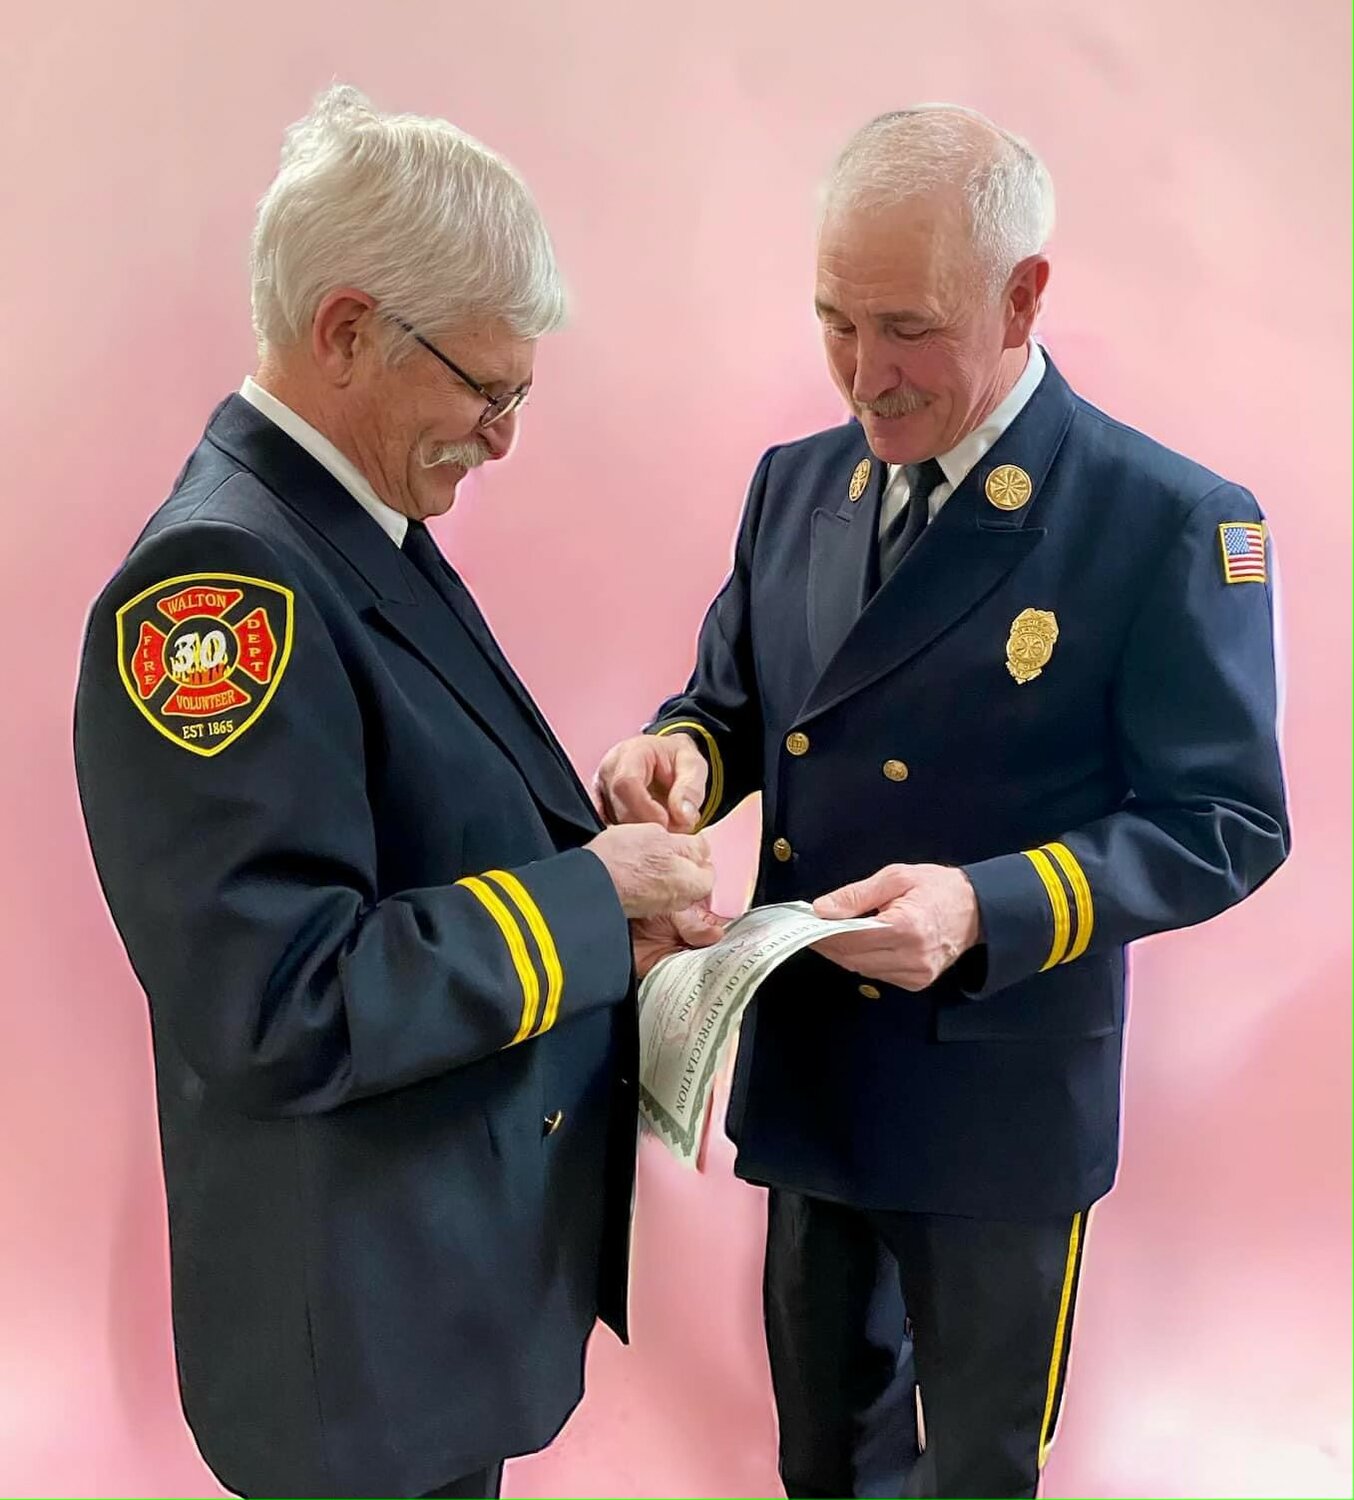 Art Munn, left, was presented with an award for 50 years of service by Walton Fire Chief Bob Brown, Feb. 17.